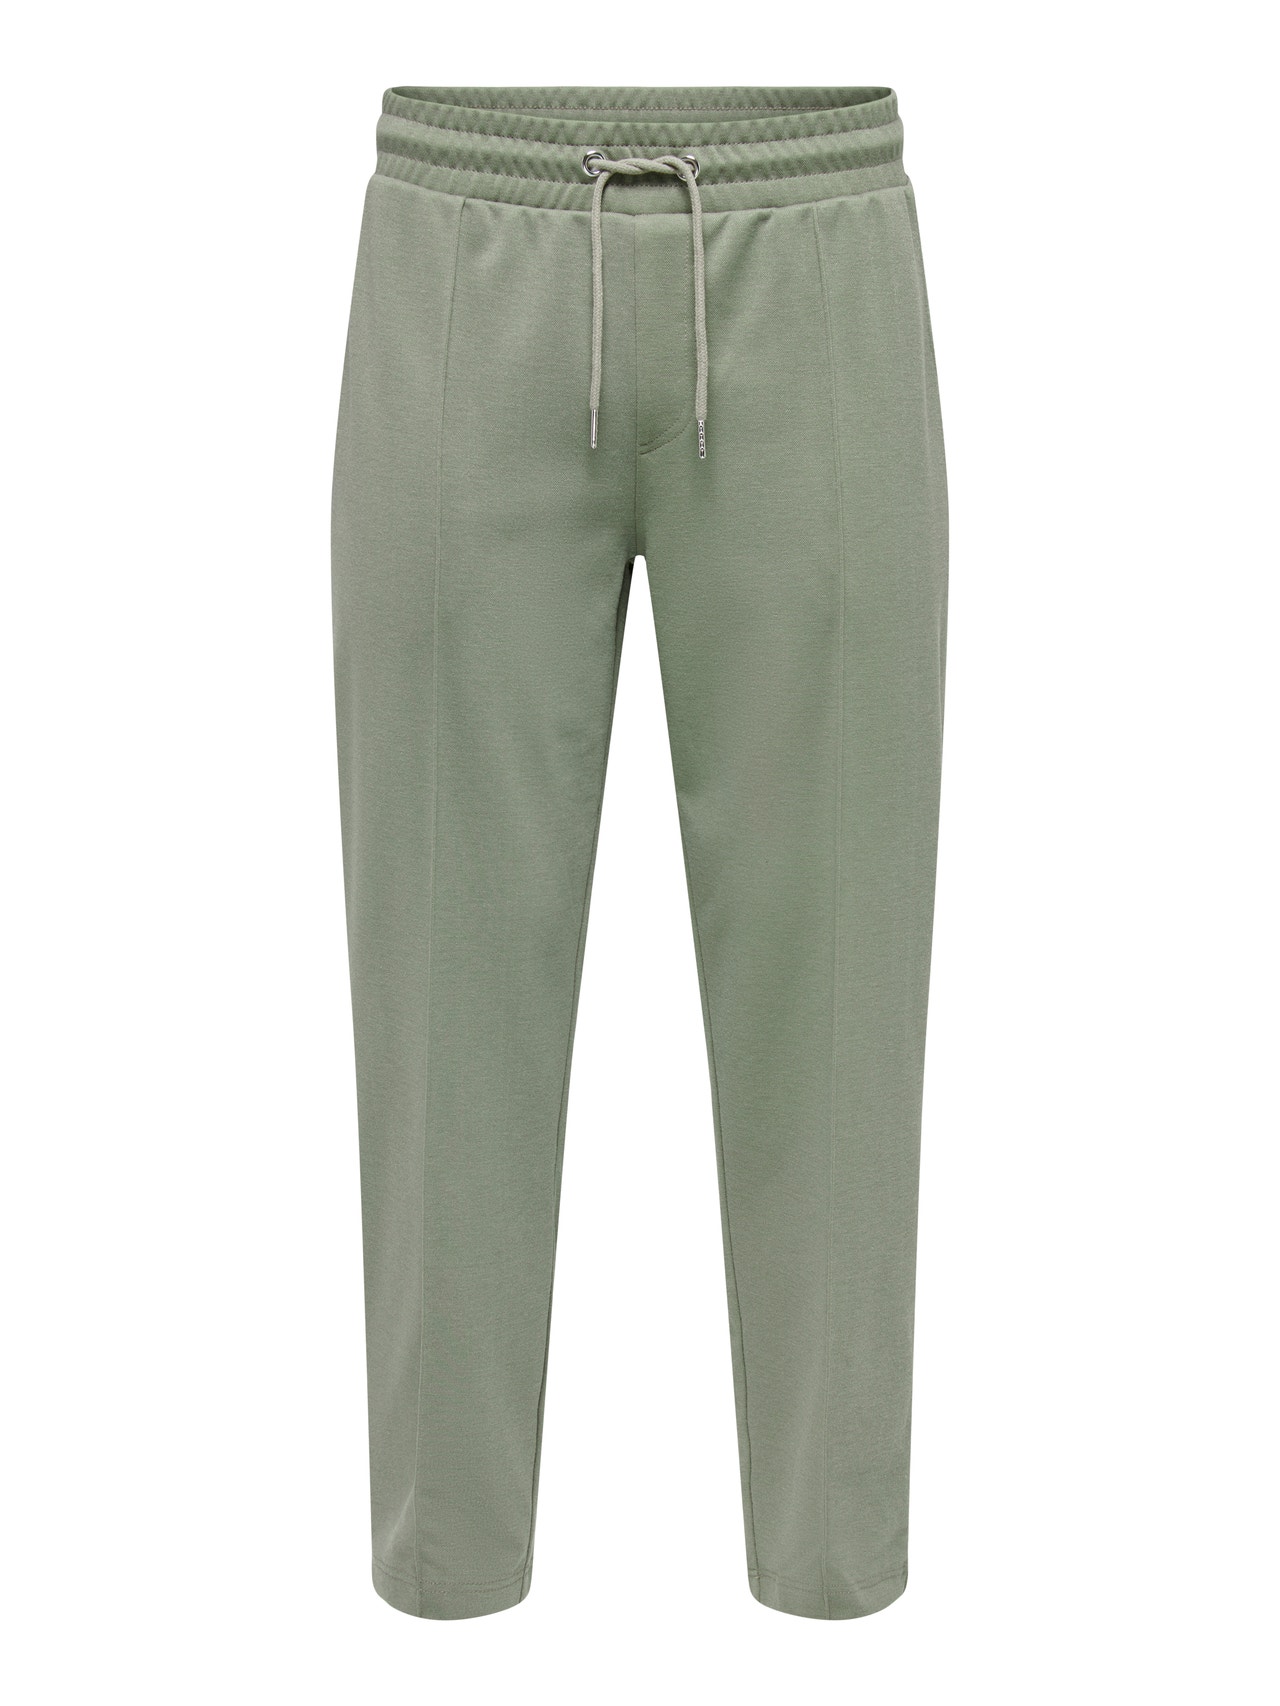 ONLY & SONS sweatpant with mid waist -Fallen Rock - 22021337